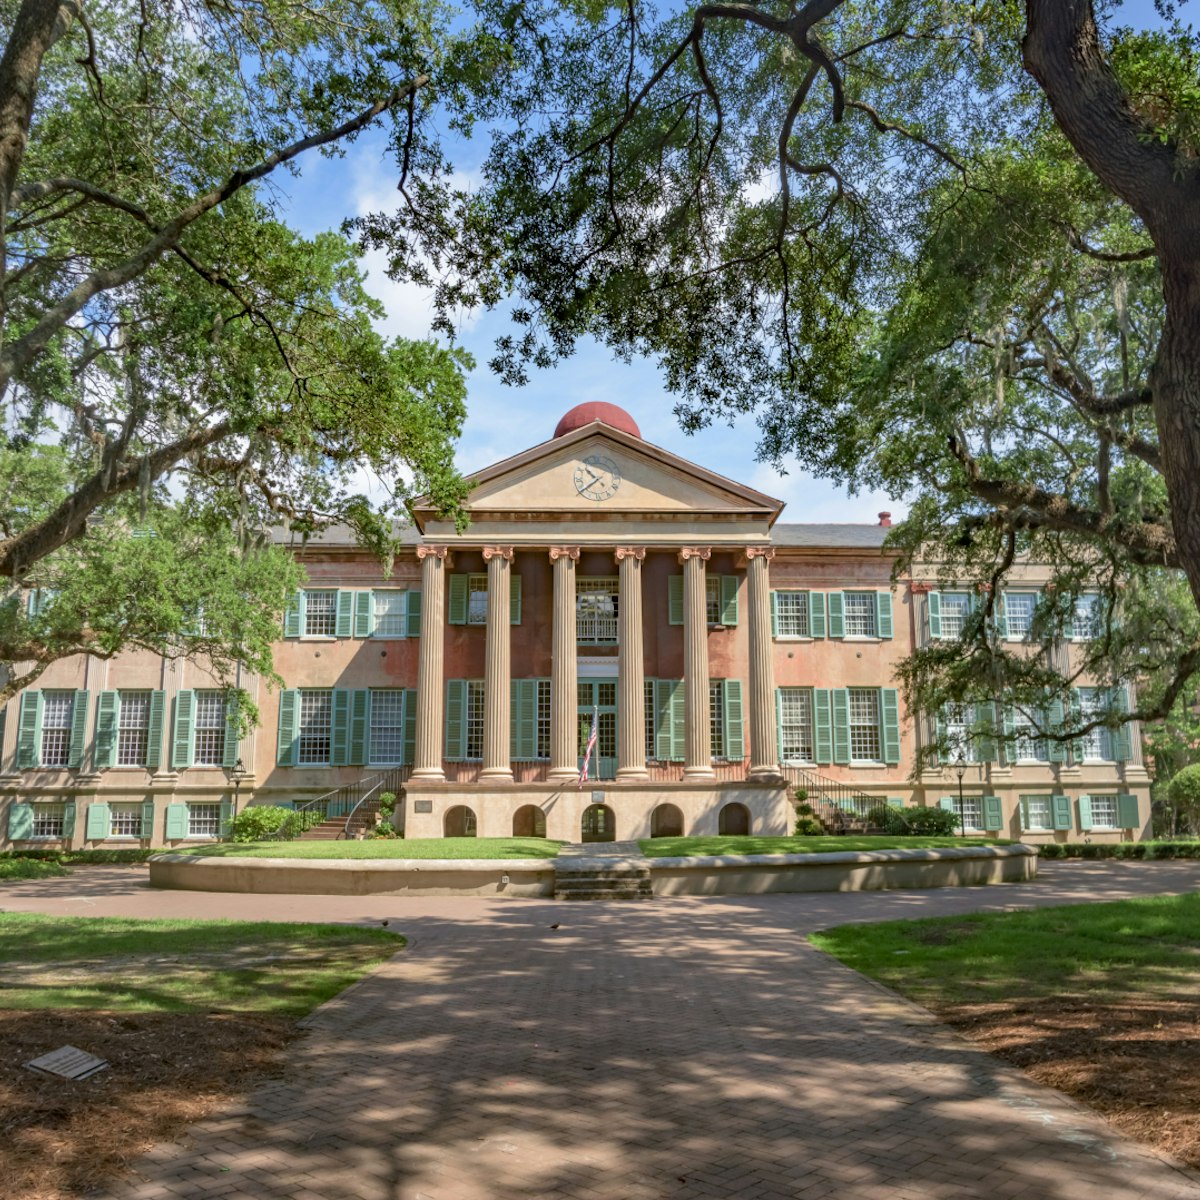 Randolph Hall, the main academic building on the College of Charleston campus. Charleston, SC. Built 1828-29 and one of the oldest college buildings still in use in the U.S. Classical, colonial antebellum style